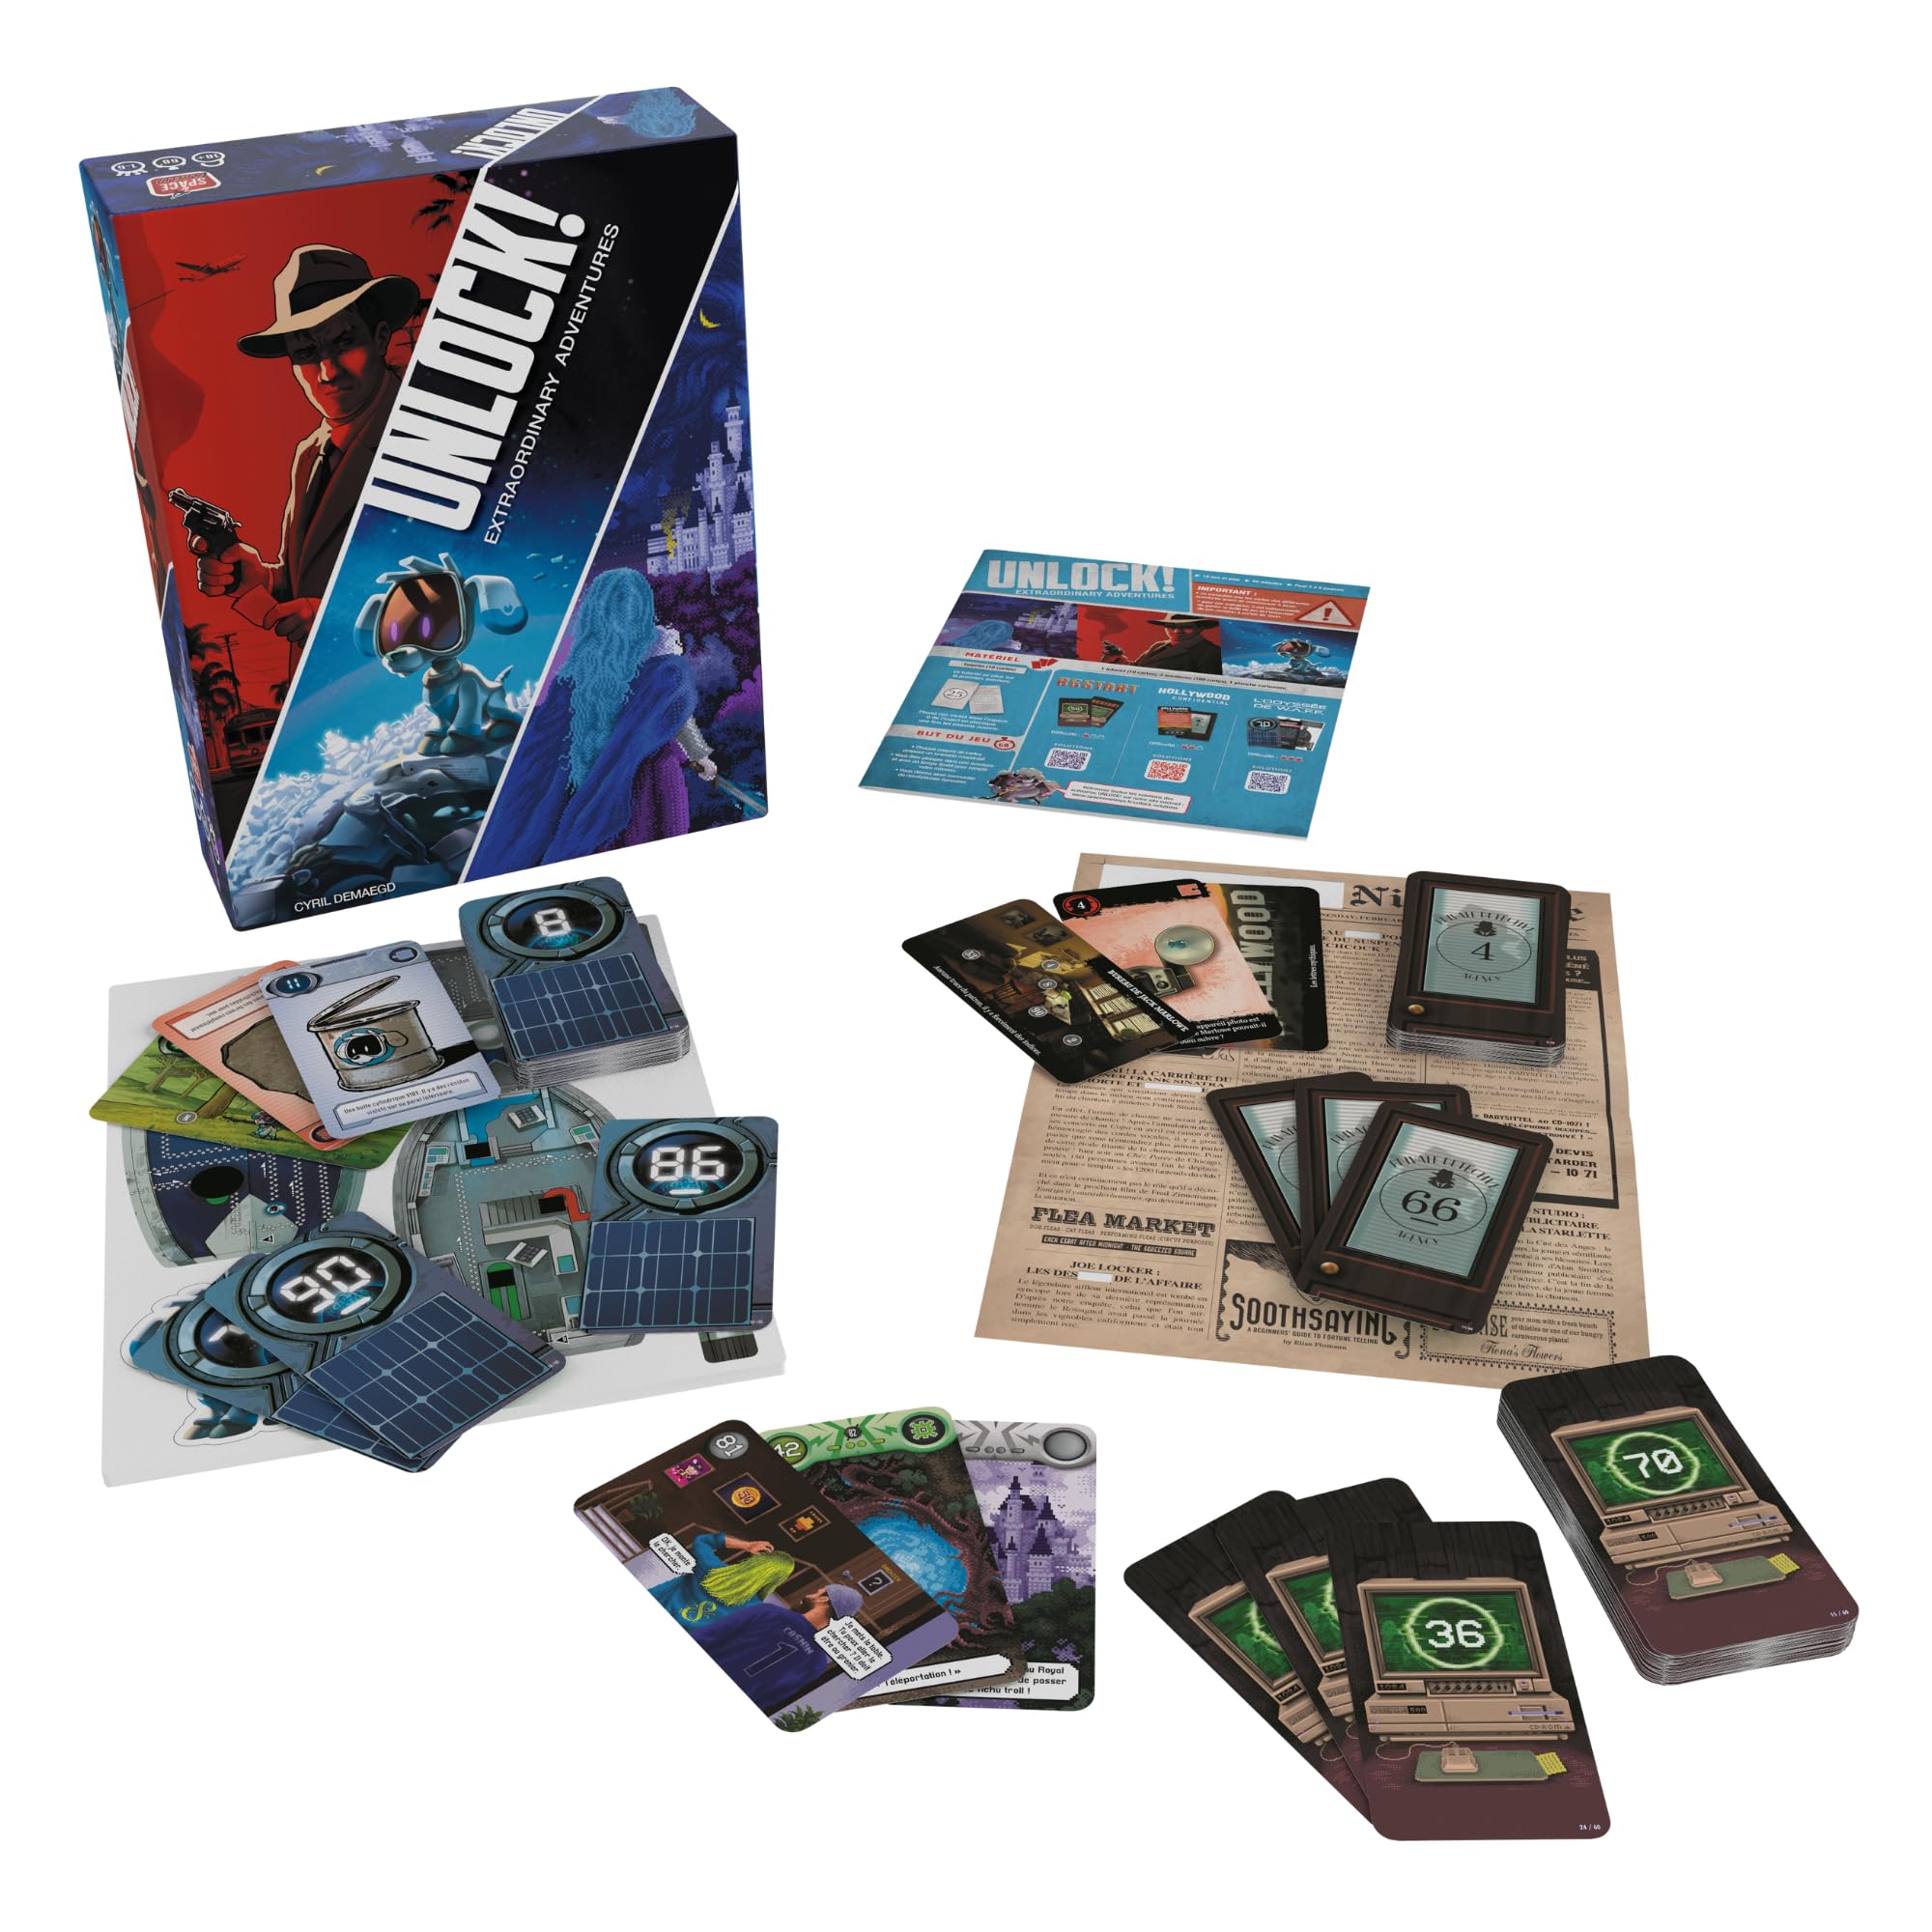 Space Cowboys Unlock! Extraordinary Adventures Card Game - Escape Room-Inspired Cooperative Adventure, Fun Family Game for Kids and Adults, Ages 10+, 1-6 Players, 1 Hour Playtime, Made